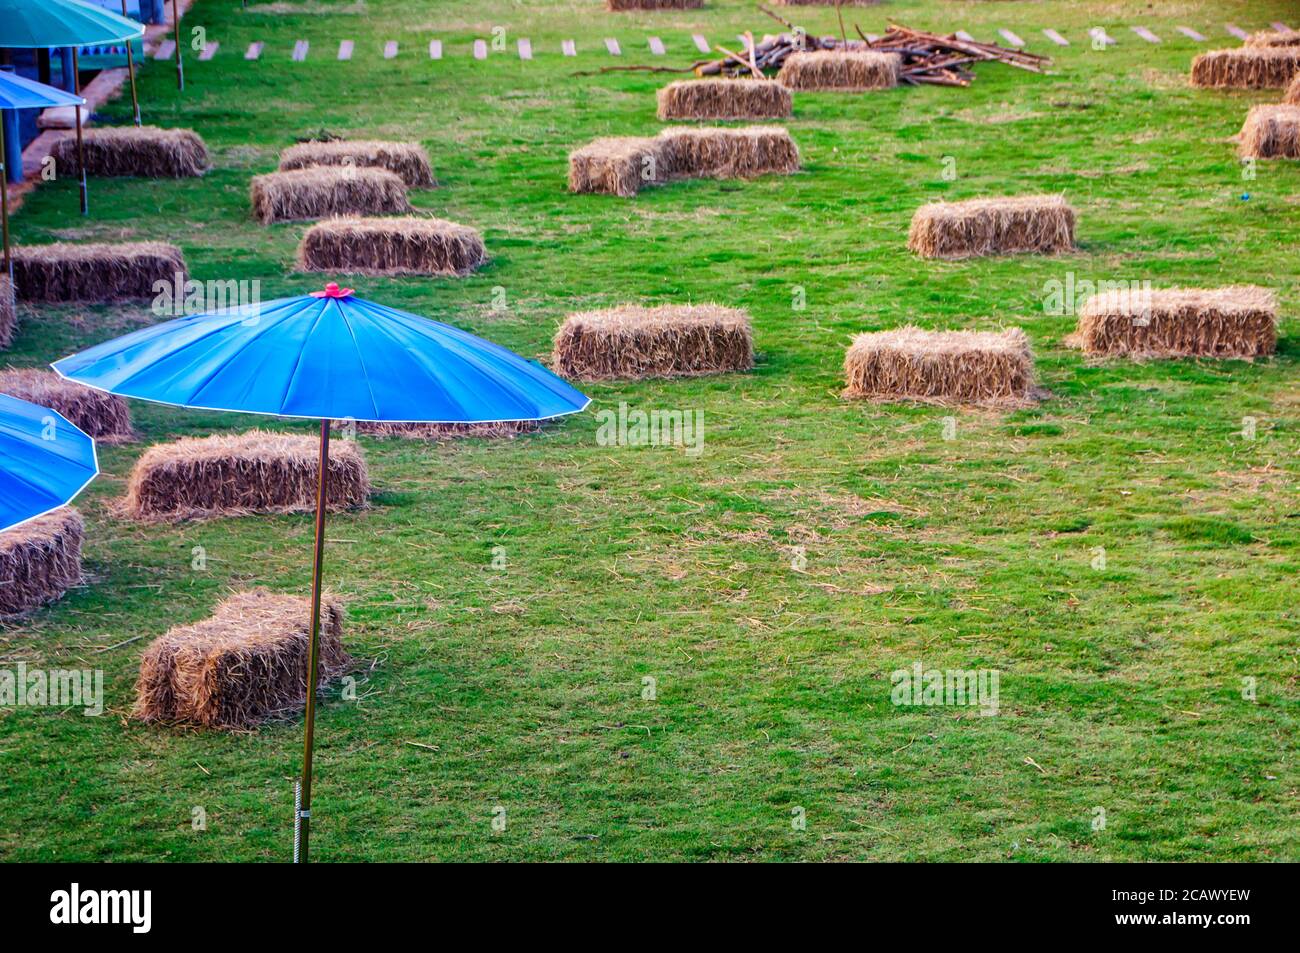 Blue parasol umrella on green grass field with haystack in the lawn yard garden. Stock Photo